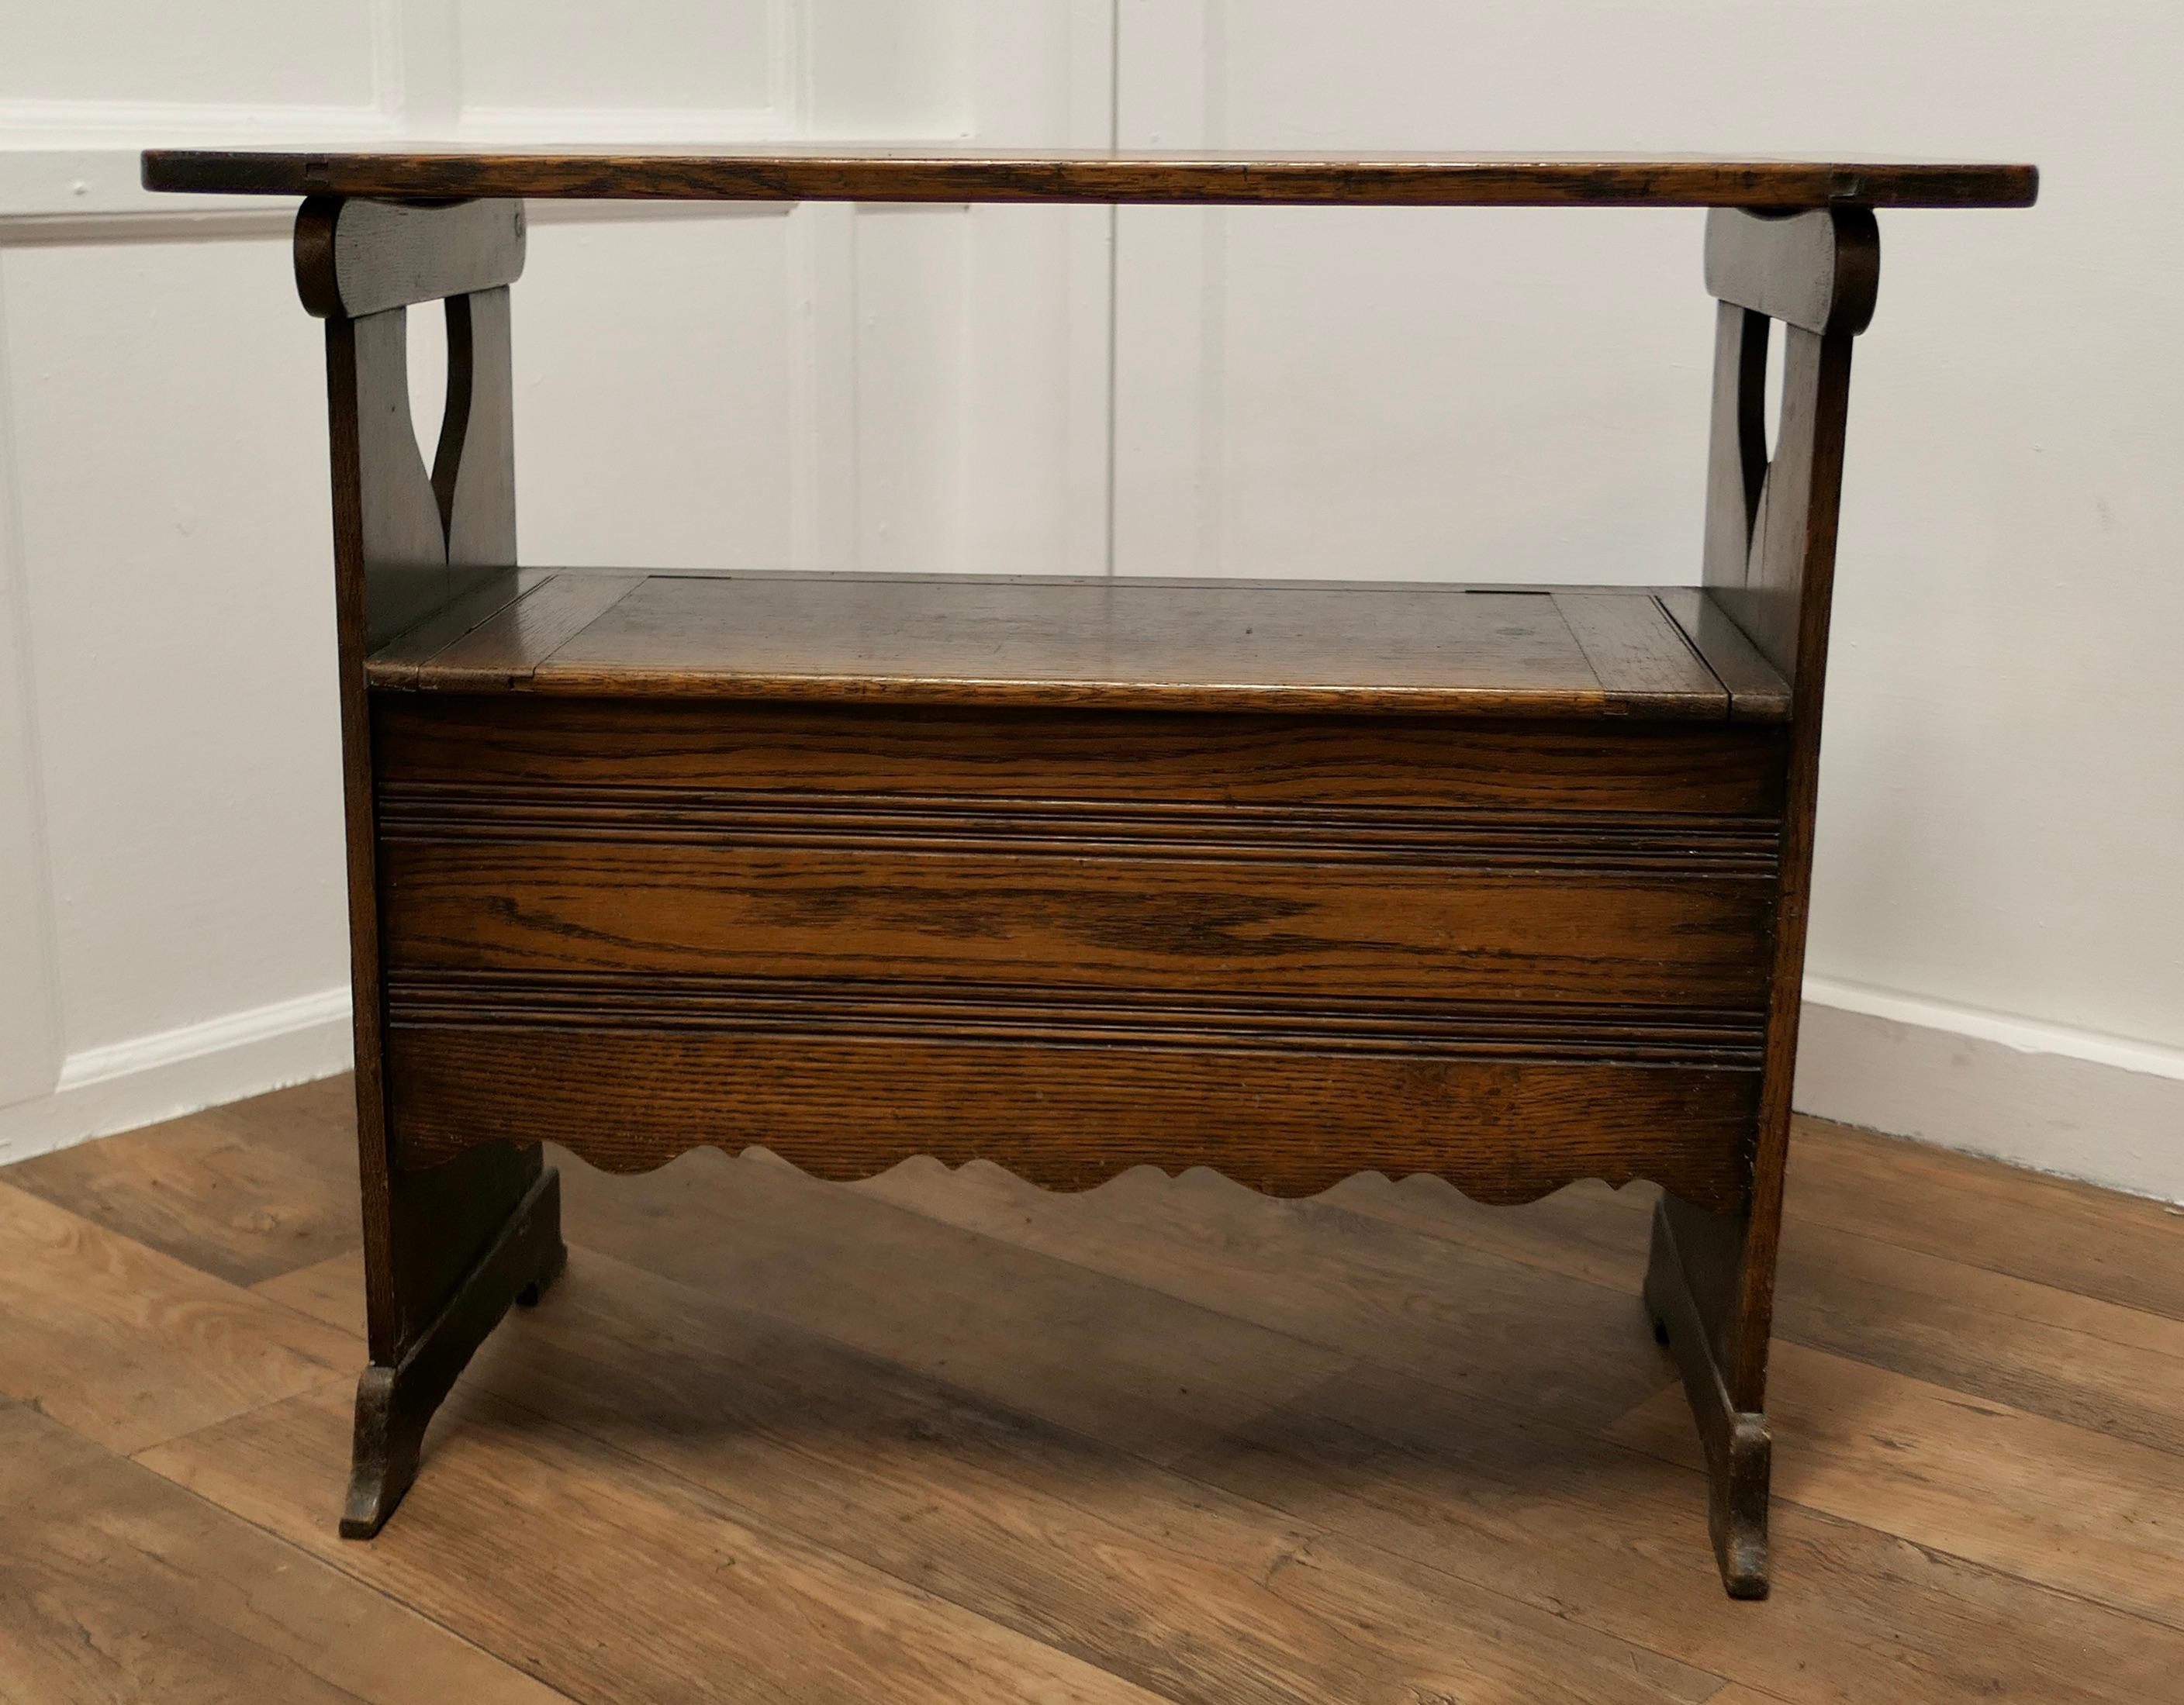 Arts and Crafts Oak Monks Bench Settle, Hall table

This useful piece is known as a Monks Bench, it is in fact a settle with storage compartment inside the seat and the back of the bench can be pulled over, it then rests on the on the top of the